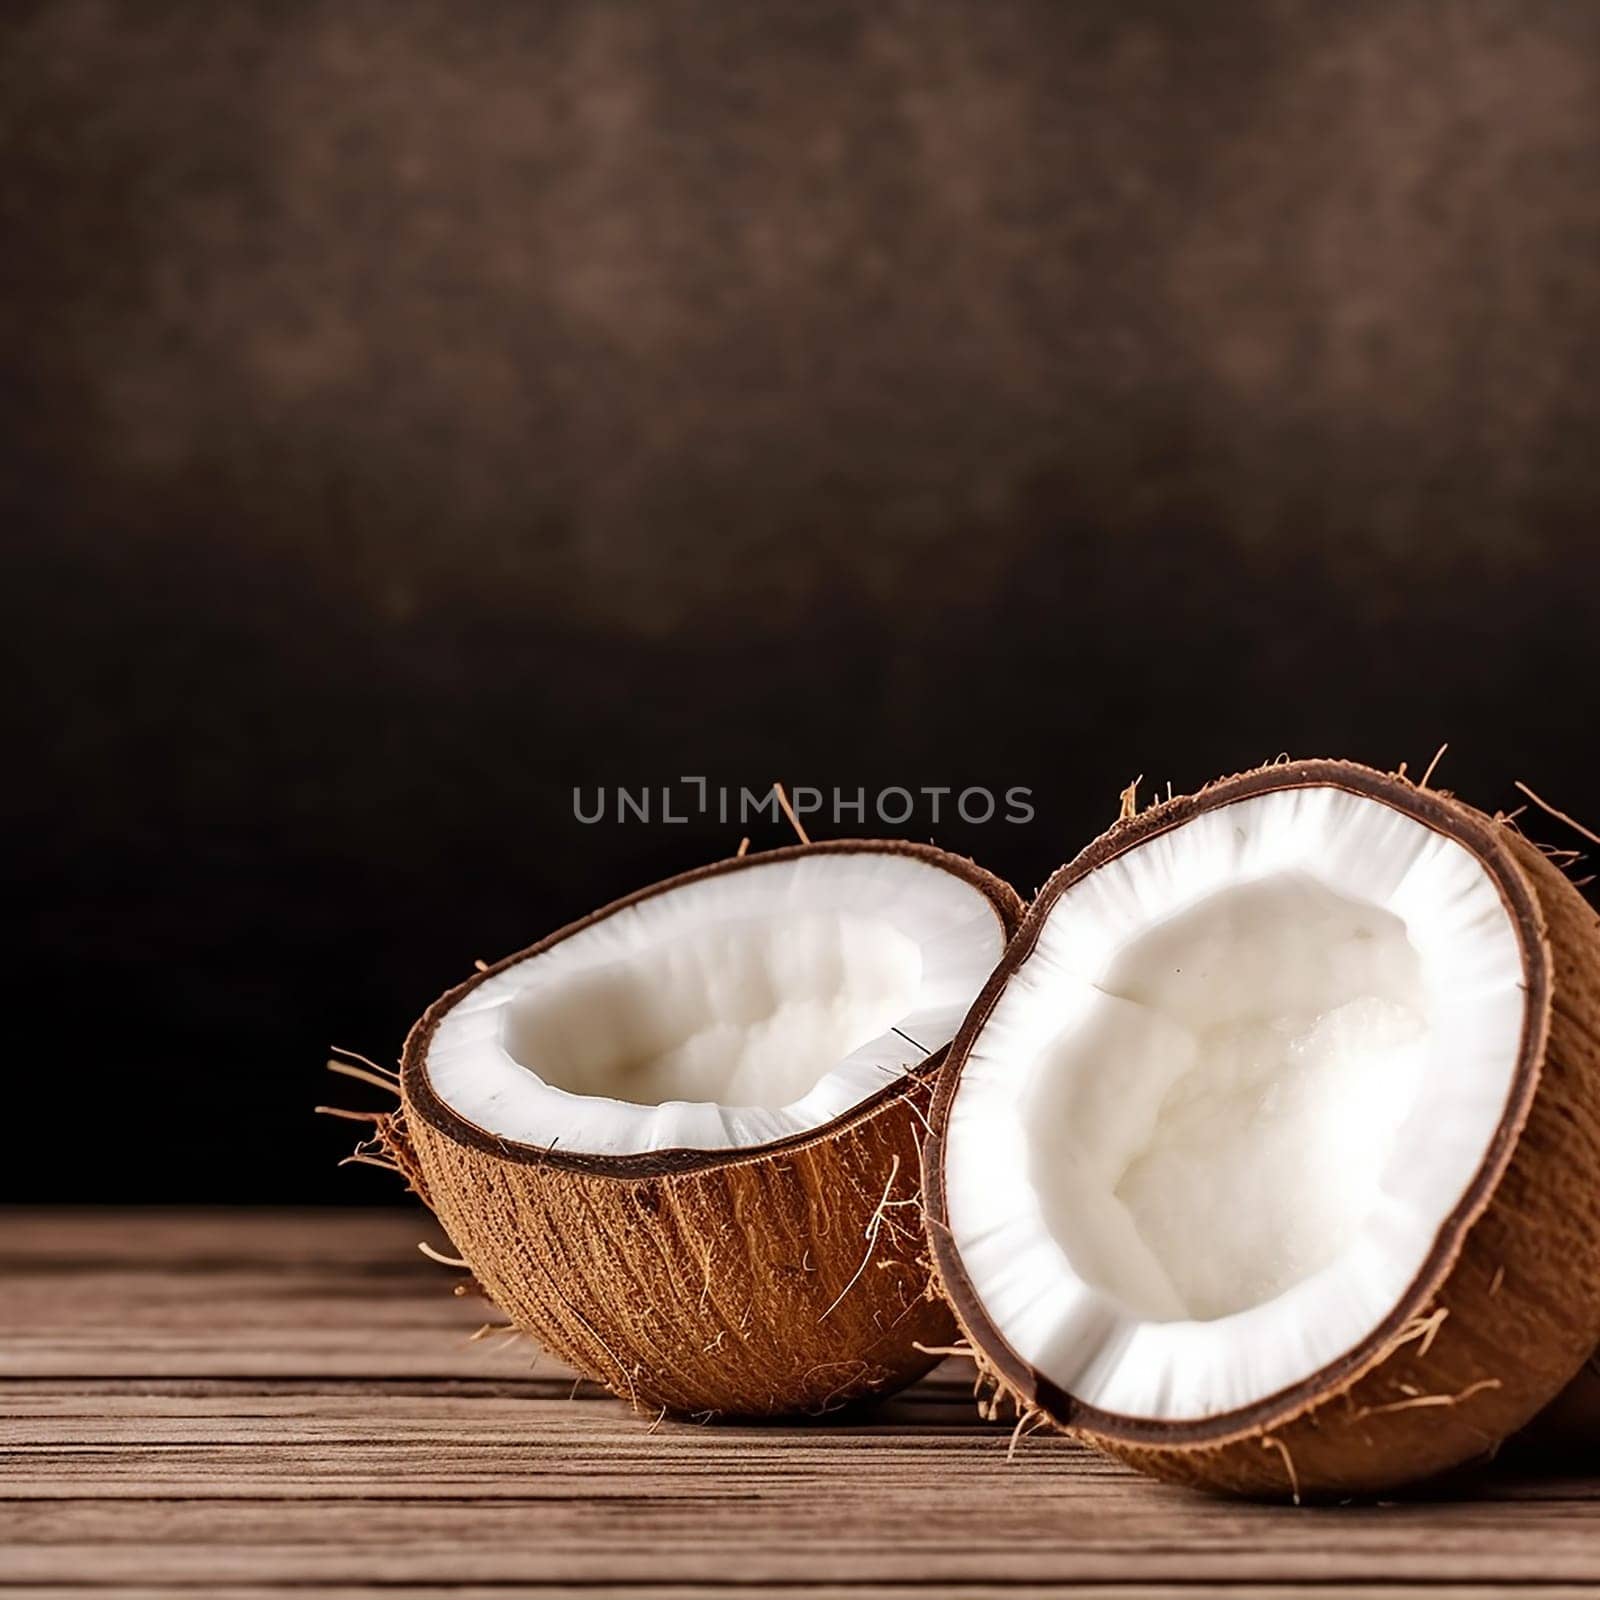 Two halved coconuts on a wooden surface with dark background by Hype2art